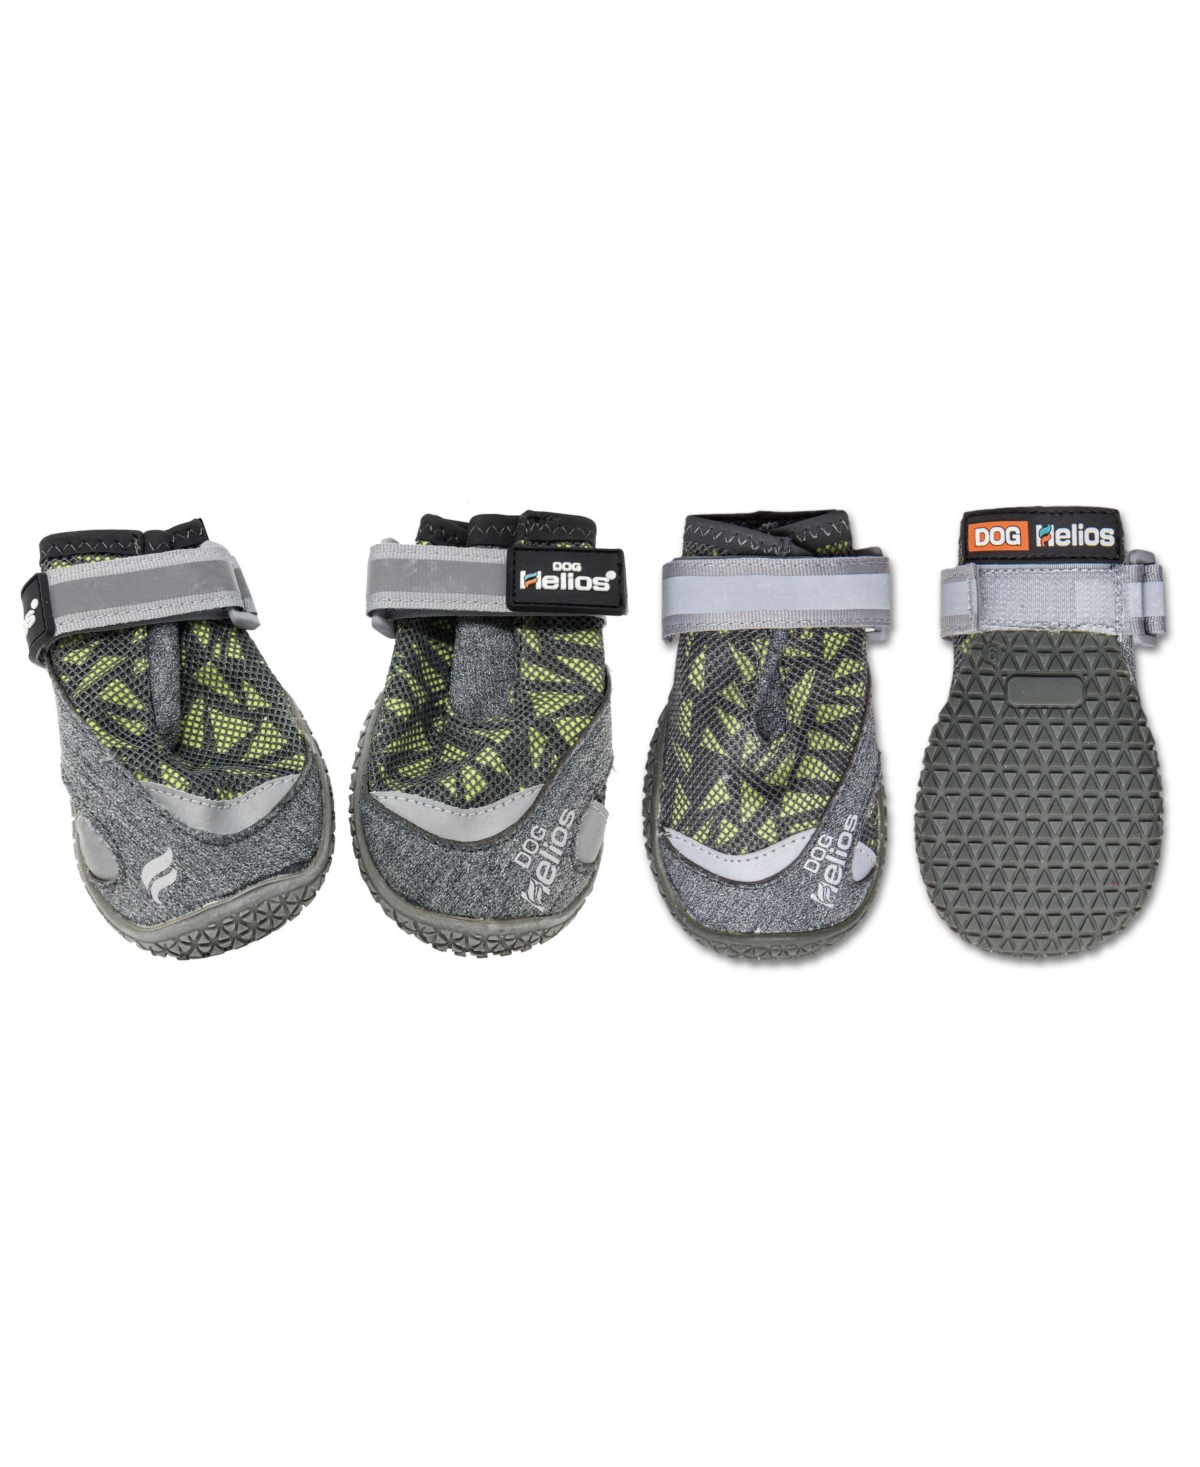 'Surface' Premium Grip Performance Dog Shoes - Green